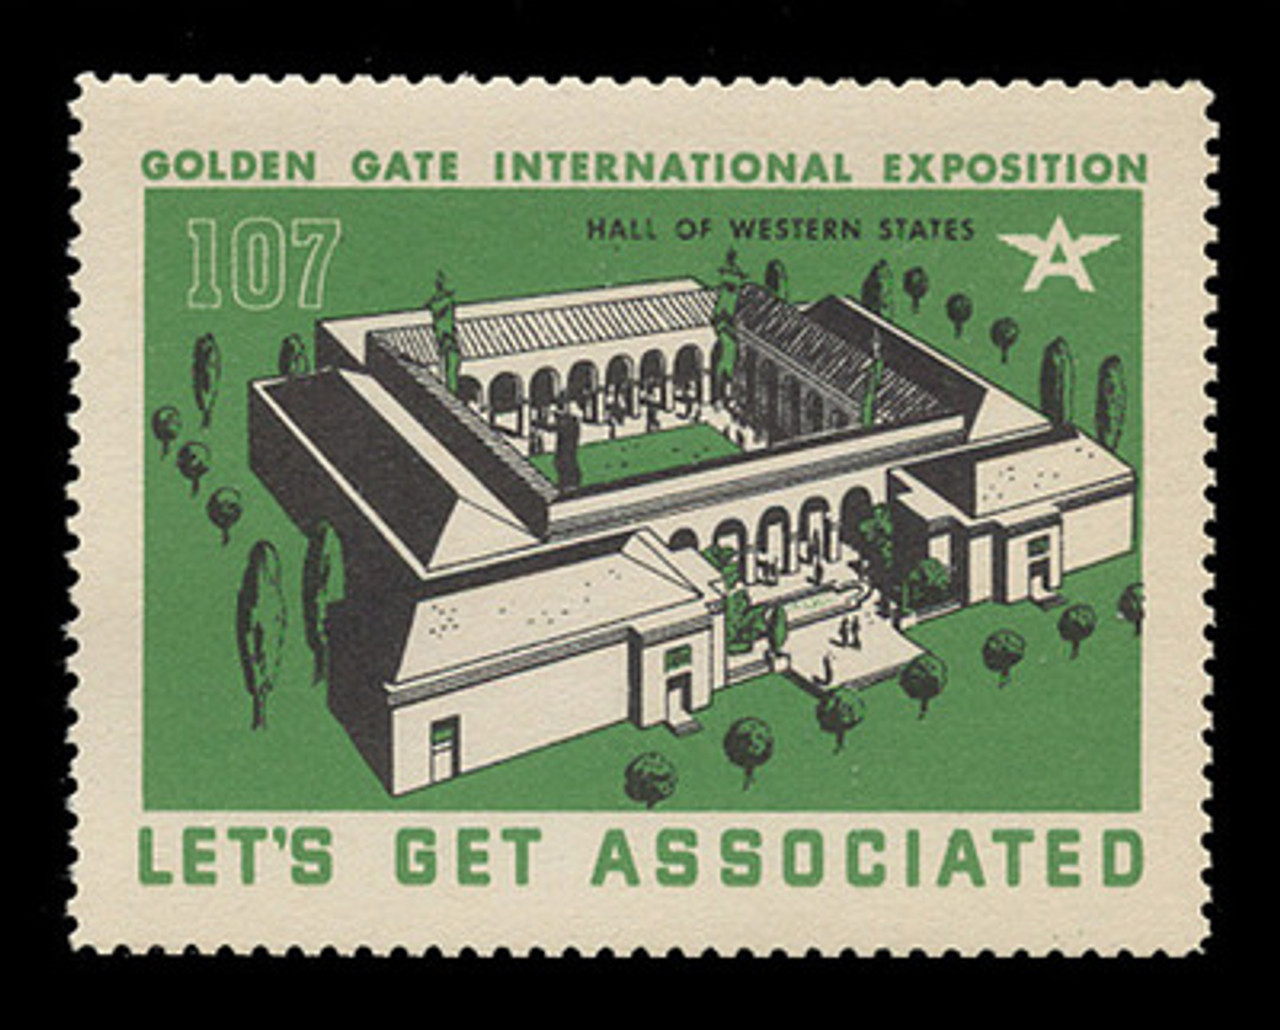 Associated Oil Company Poster Stamps of 1938-9 - #107, Hall of Western States